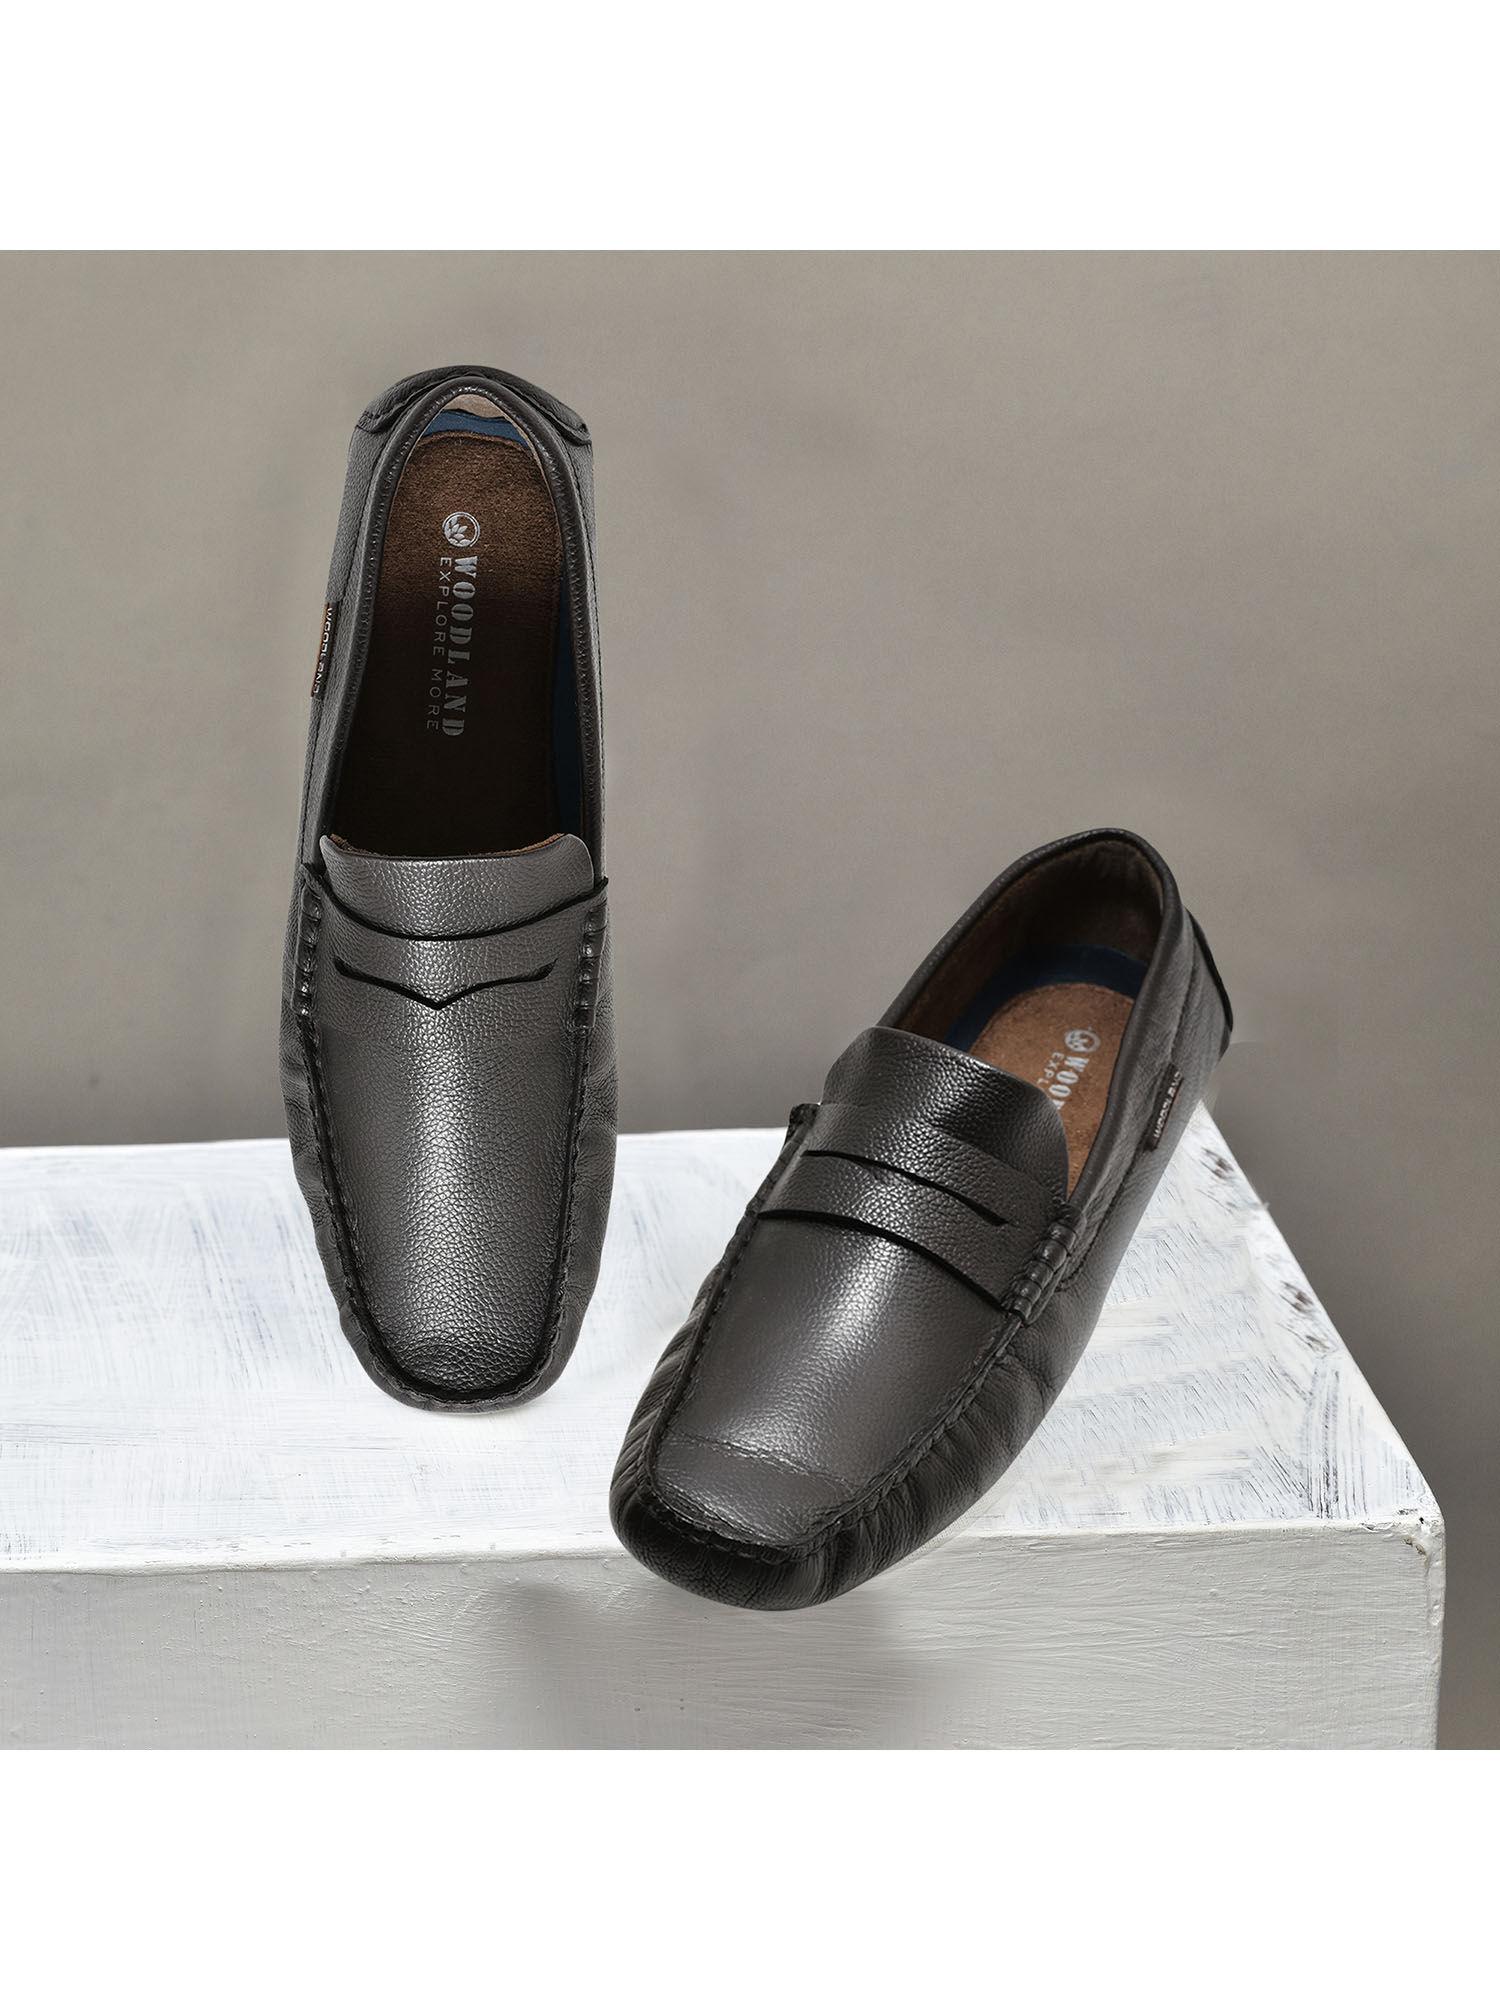 mens-casual-loafers-brown